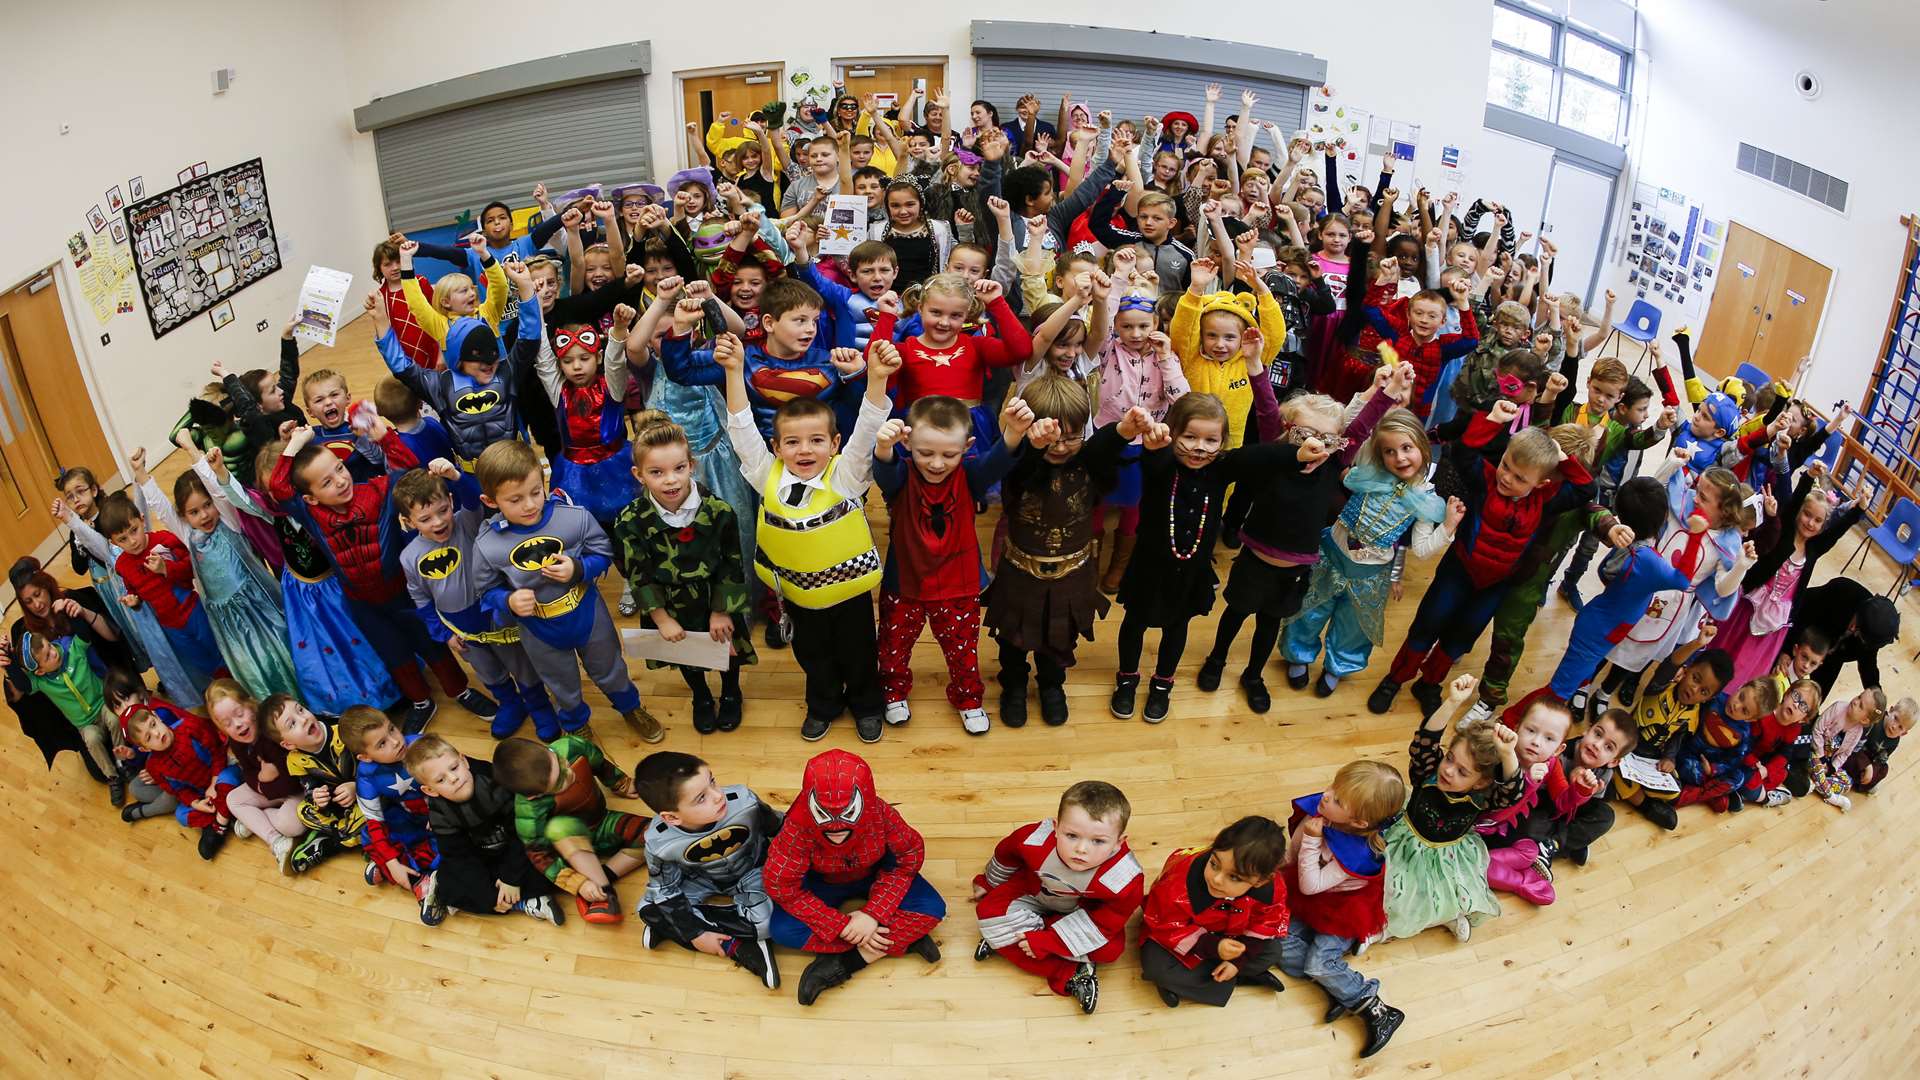 Pupils at James the Great Academy in East Malling dressed as superheroes. Picture: Martin Apps